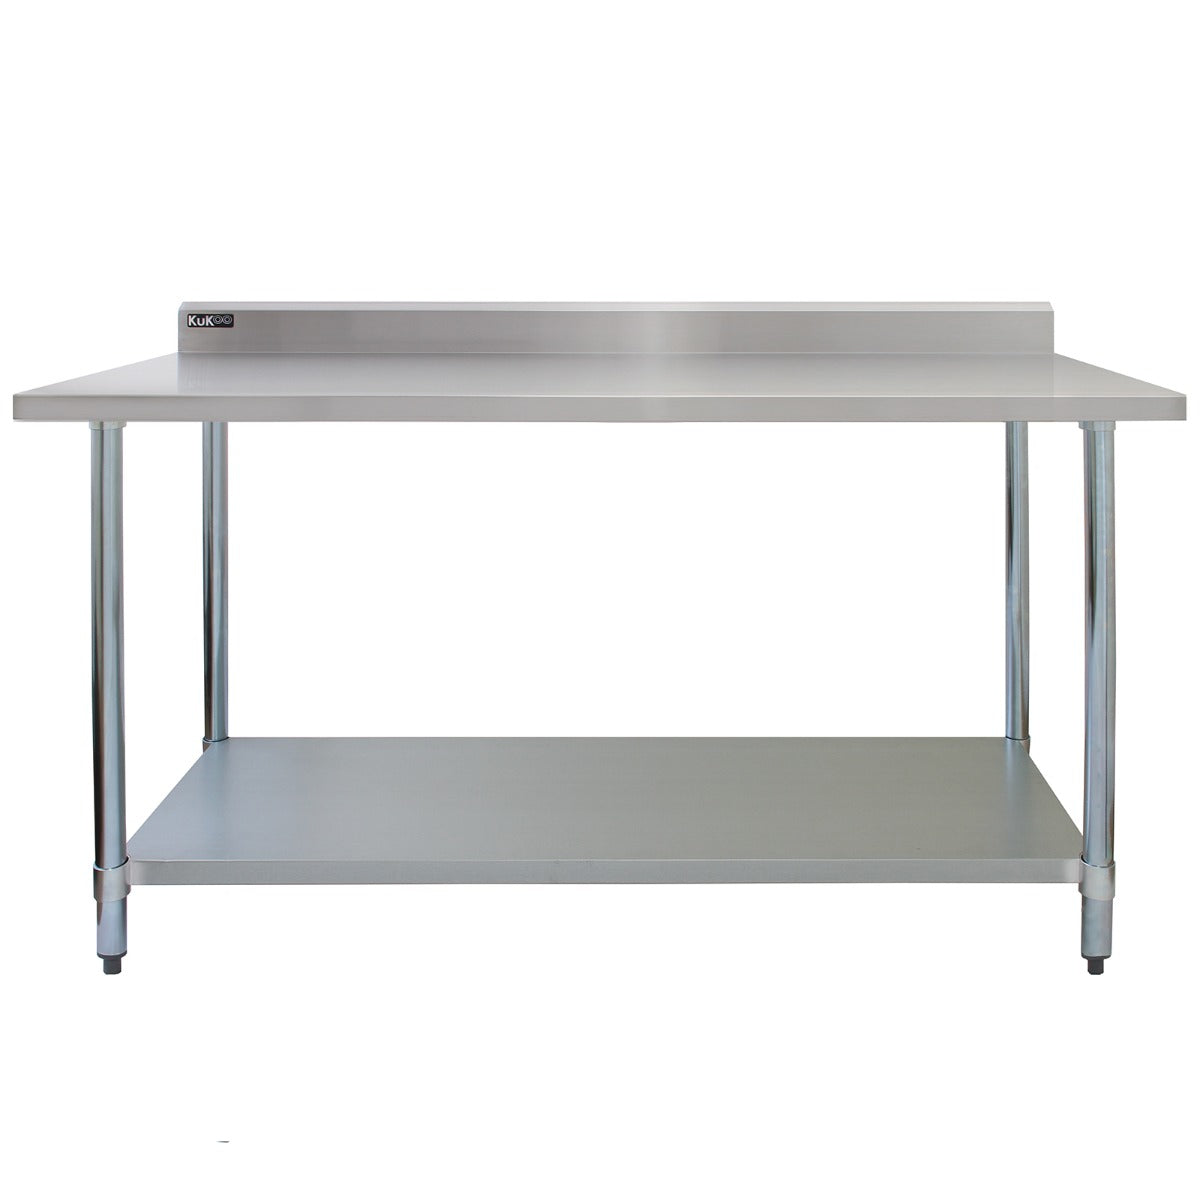 KuKoo Commercial Sink With Pre-Rinse Tap, 6ft Stainless Steel Catering Bench, 2 x Wall Mounted Shelves